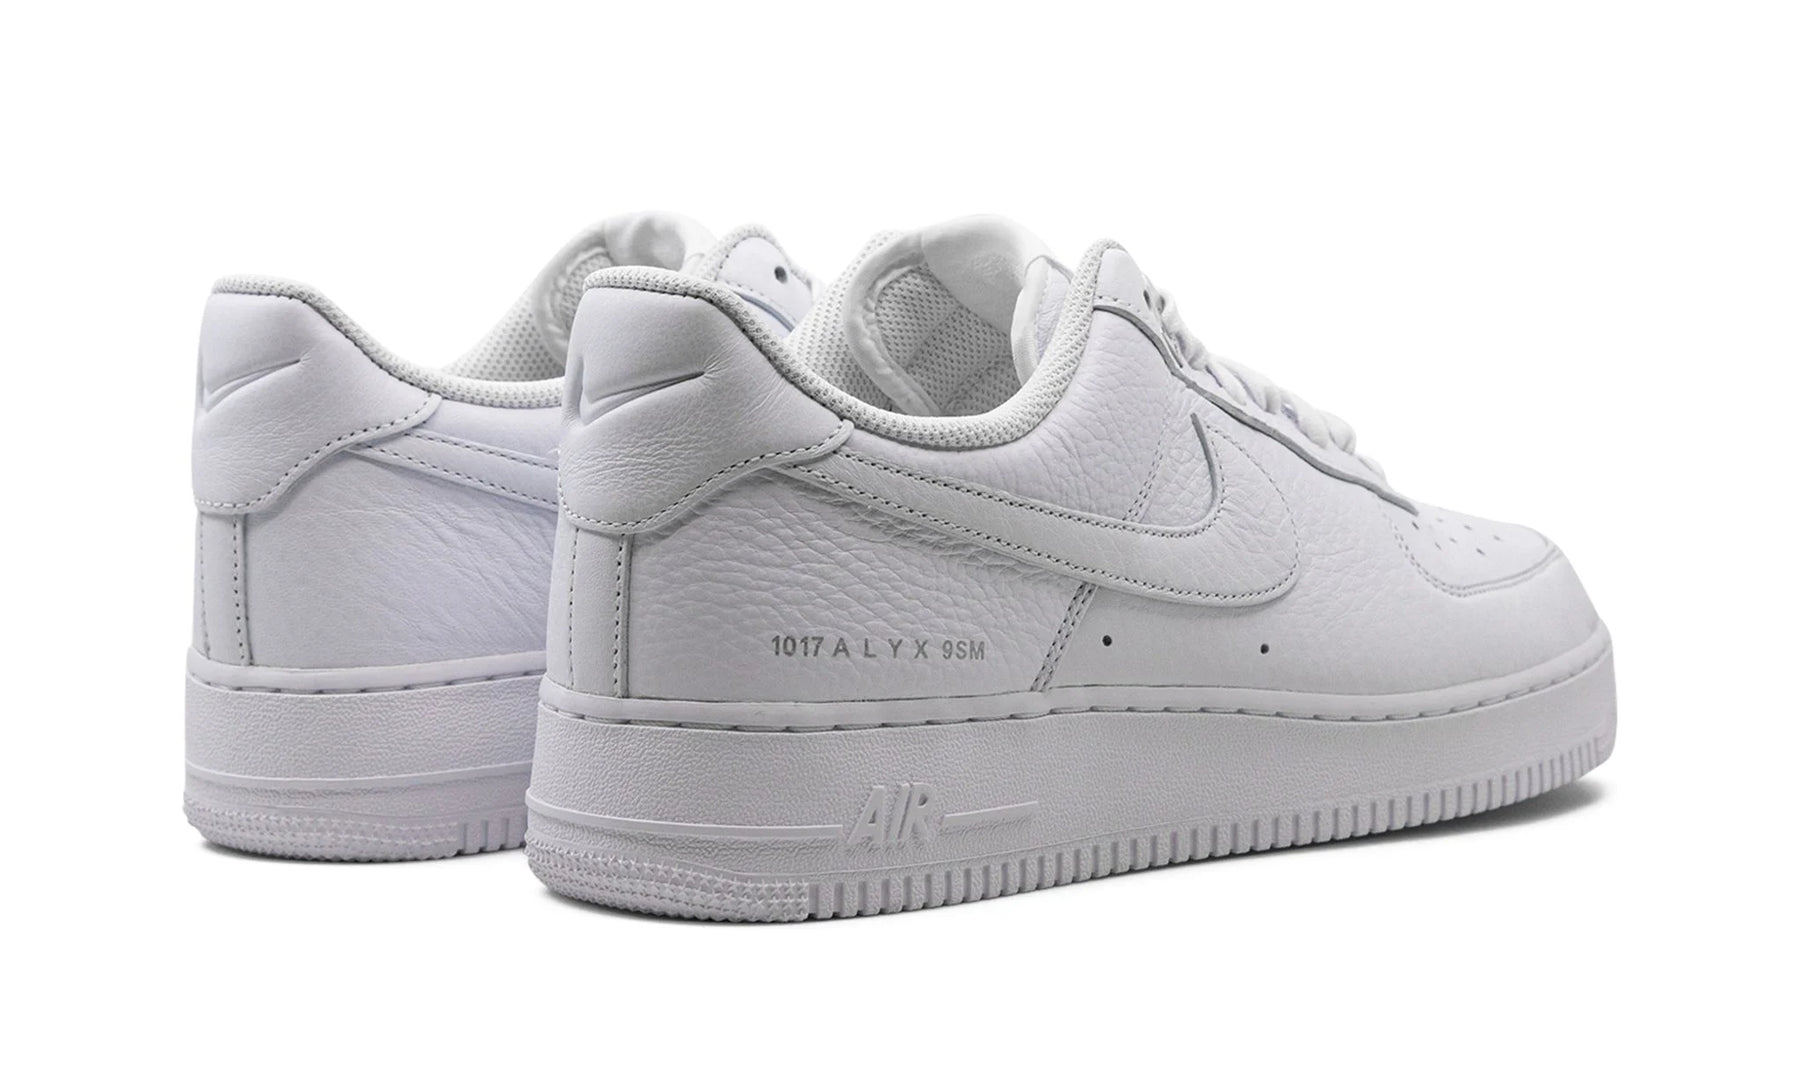 Nike Air Force 1 Low "Alyx - White"